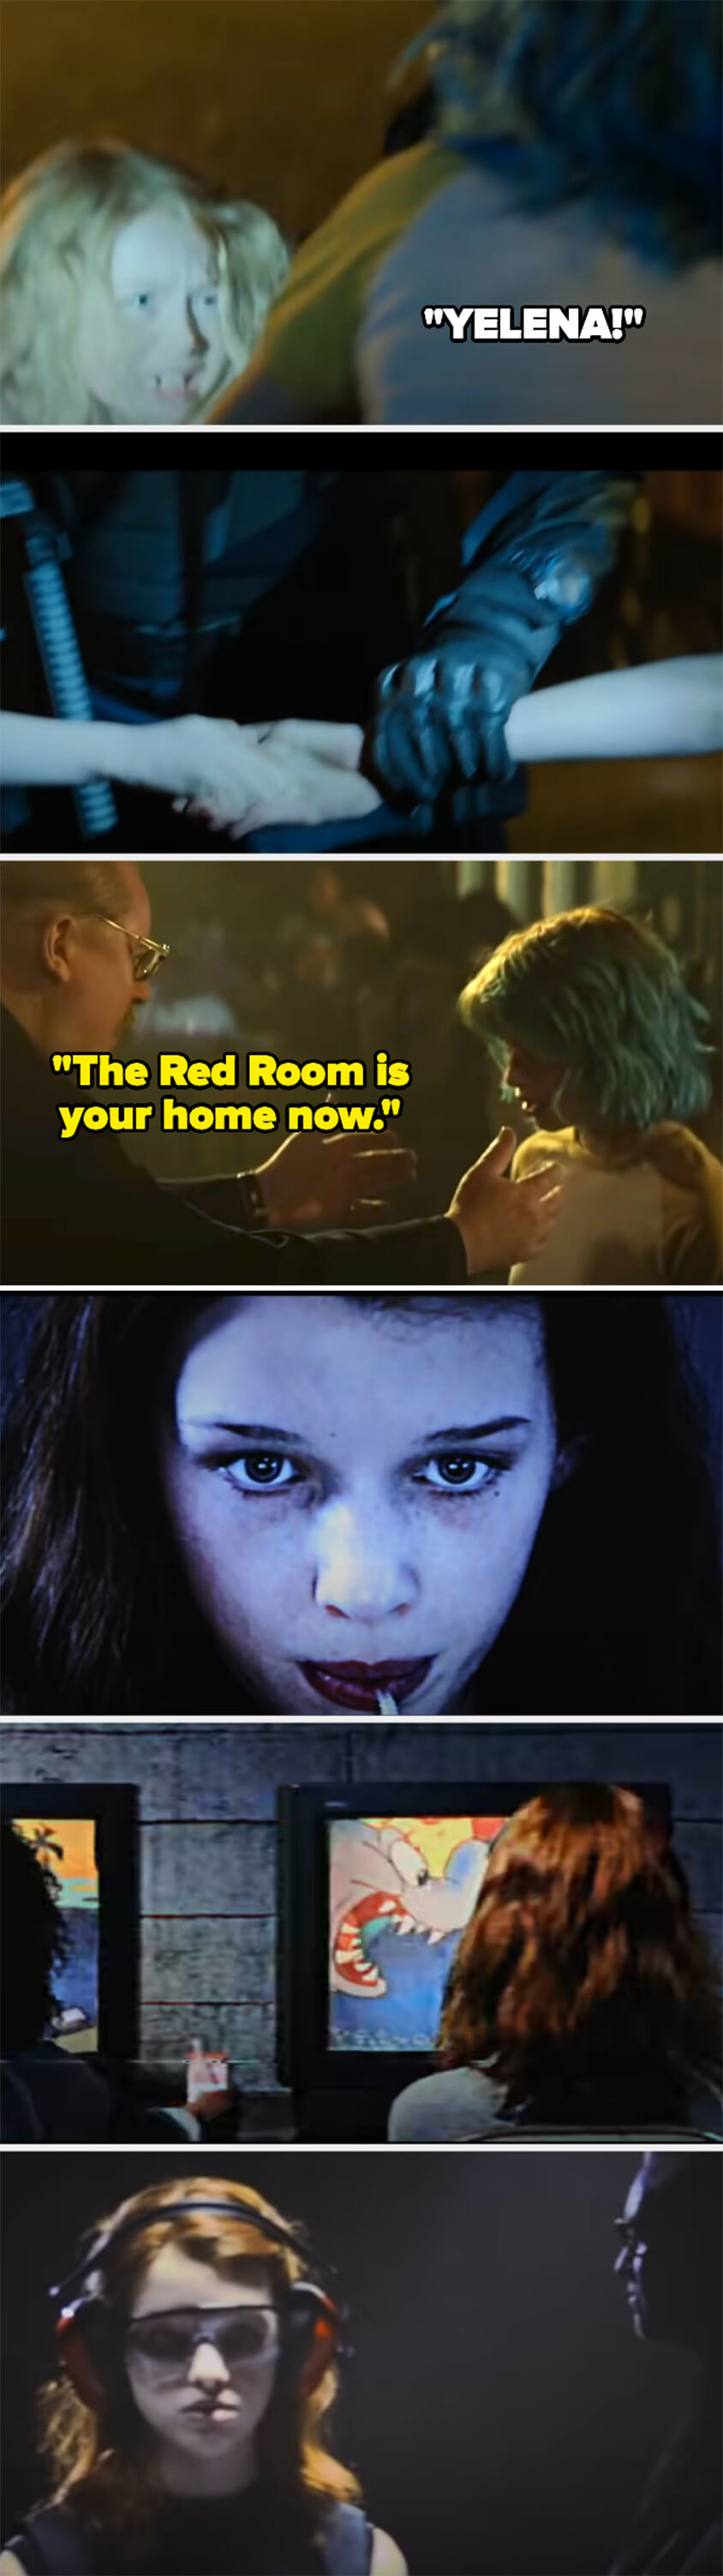 Yelena and Natasha are pulled apart and natasha is told the red room is her home. then there are flashes of her being taught to shoot and watching cartoons